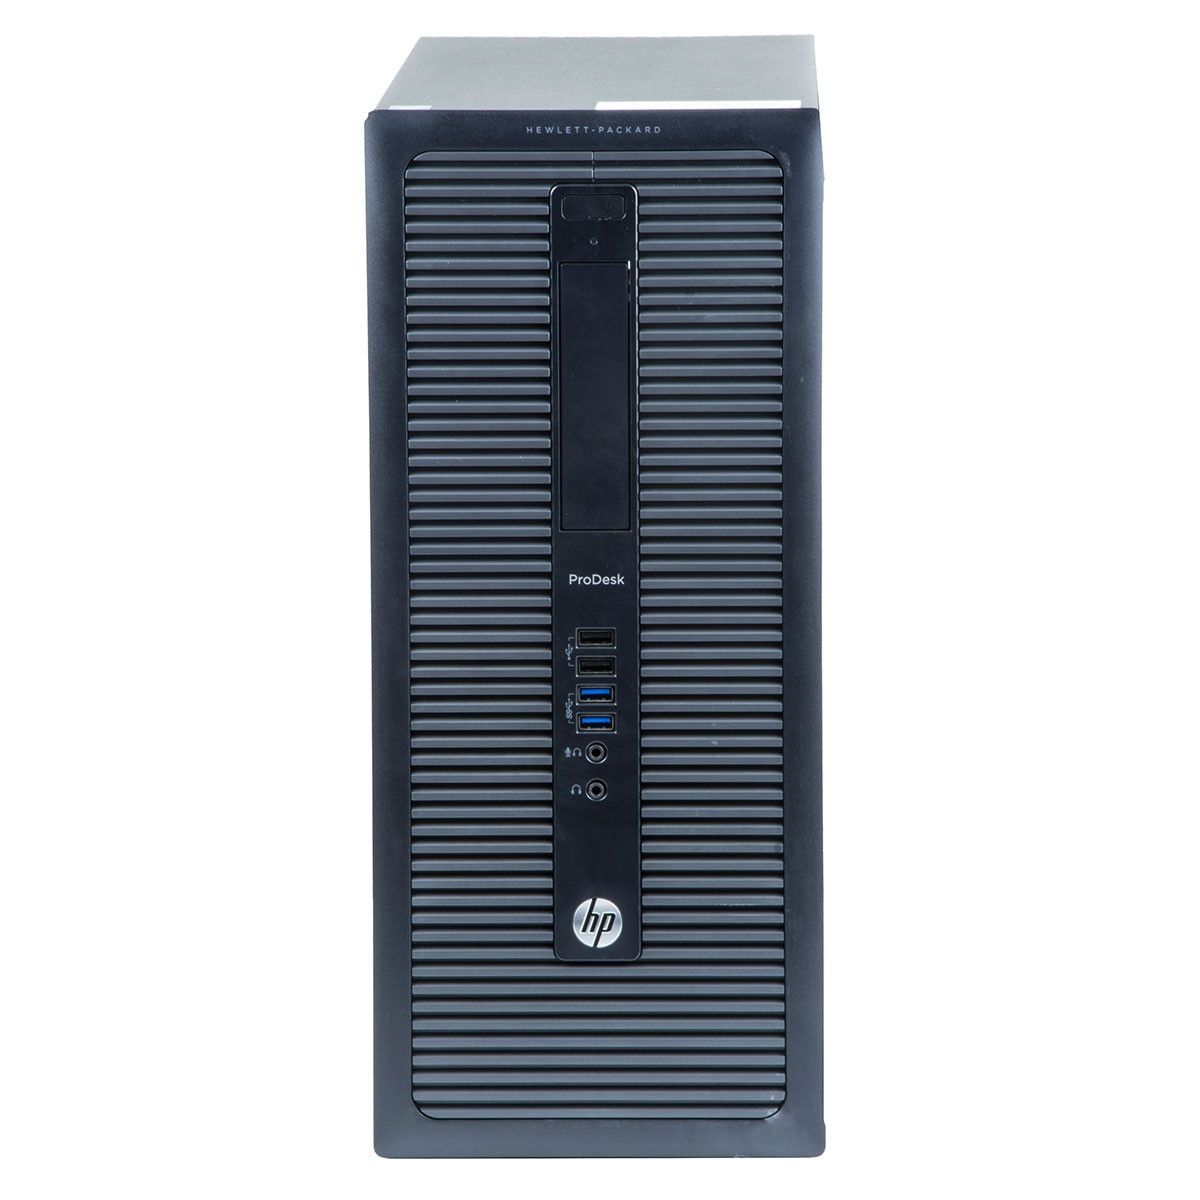 HP Prodesk 600 G1, Core i3-4150 3.50GHz, 8GB DDR3, 256GB SSD, DVD, Tower, calculator refurbished_1